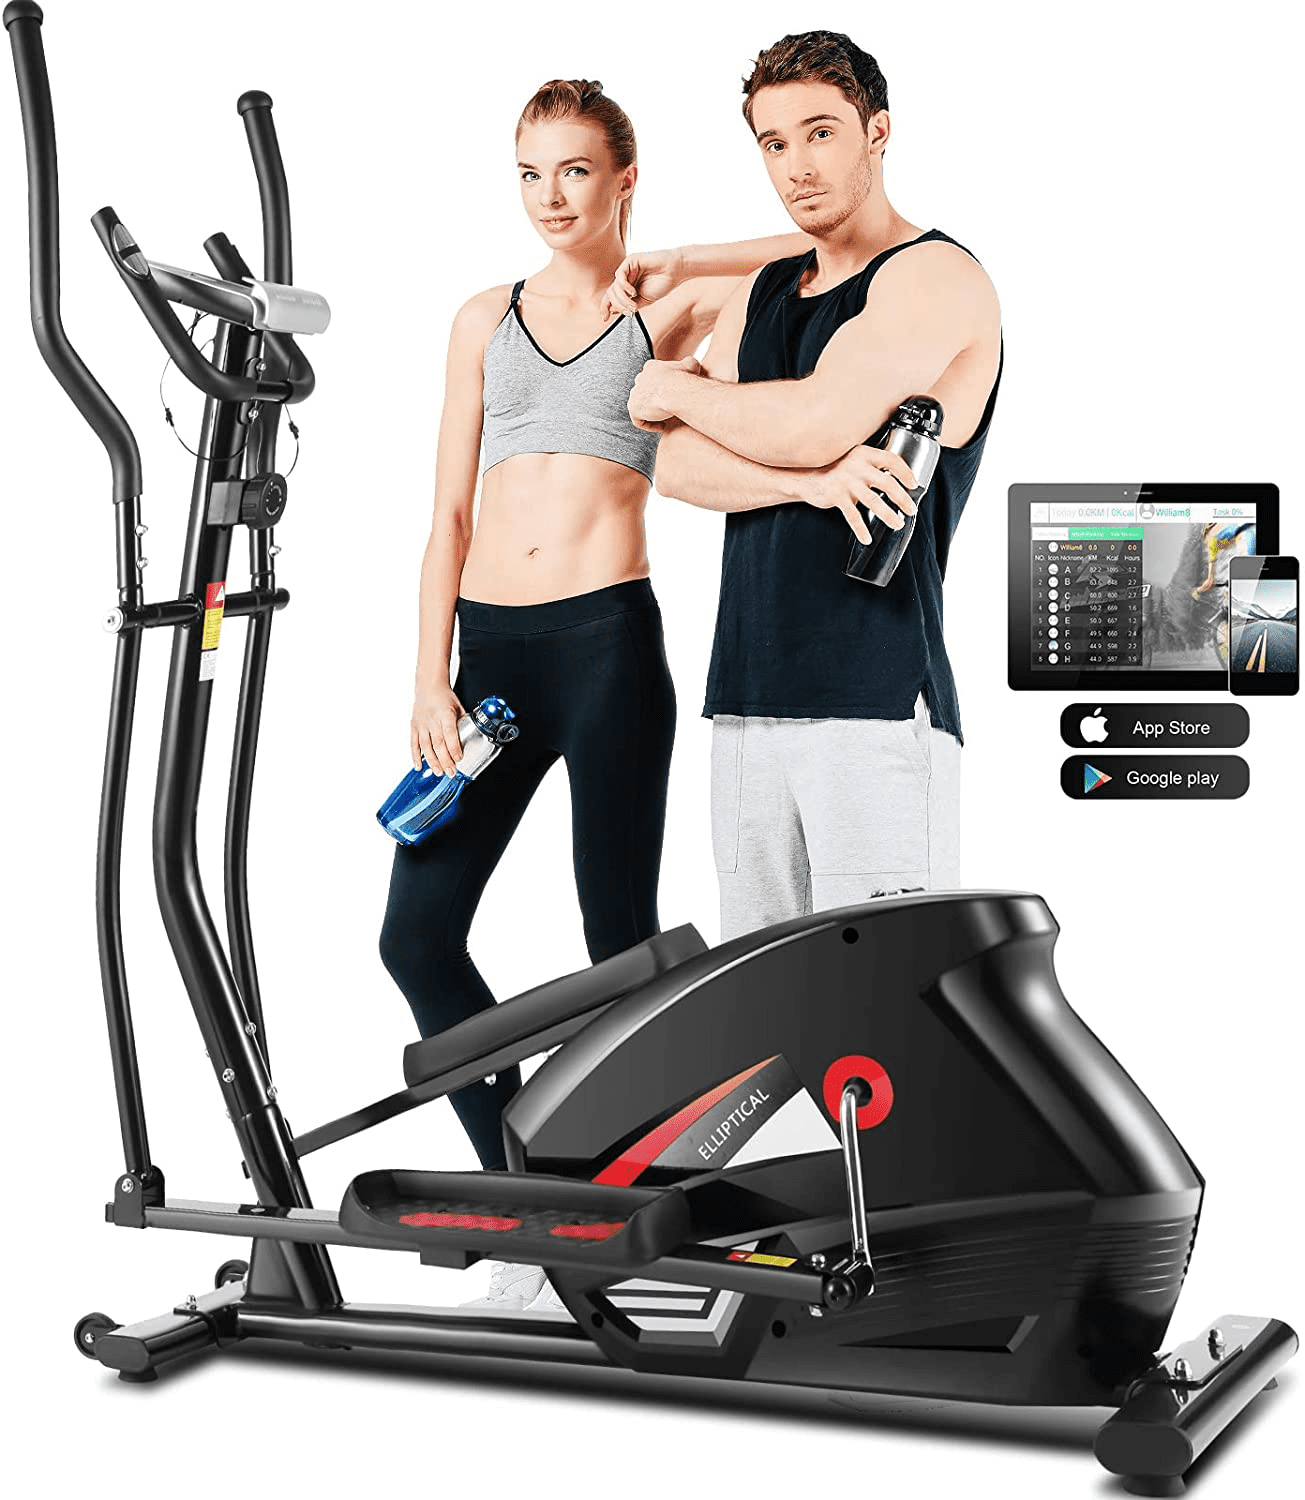 ANCHEER Elliptical,Exercise Equipment,Elliptical Machines for Home Use,Cross Trainer Machine with 10-Level Resistance and LCD Monitor,Max User Weight:390lbs 